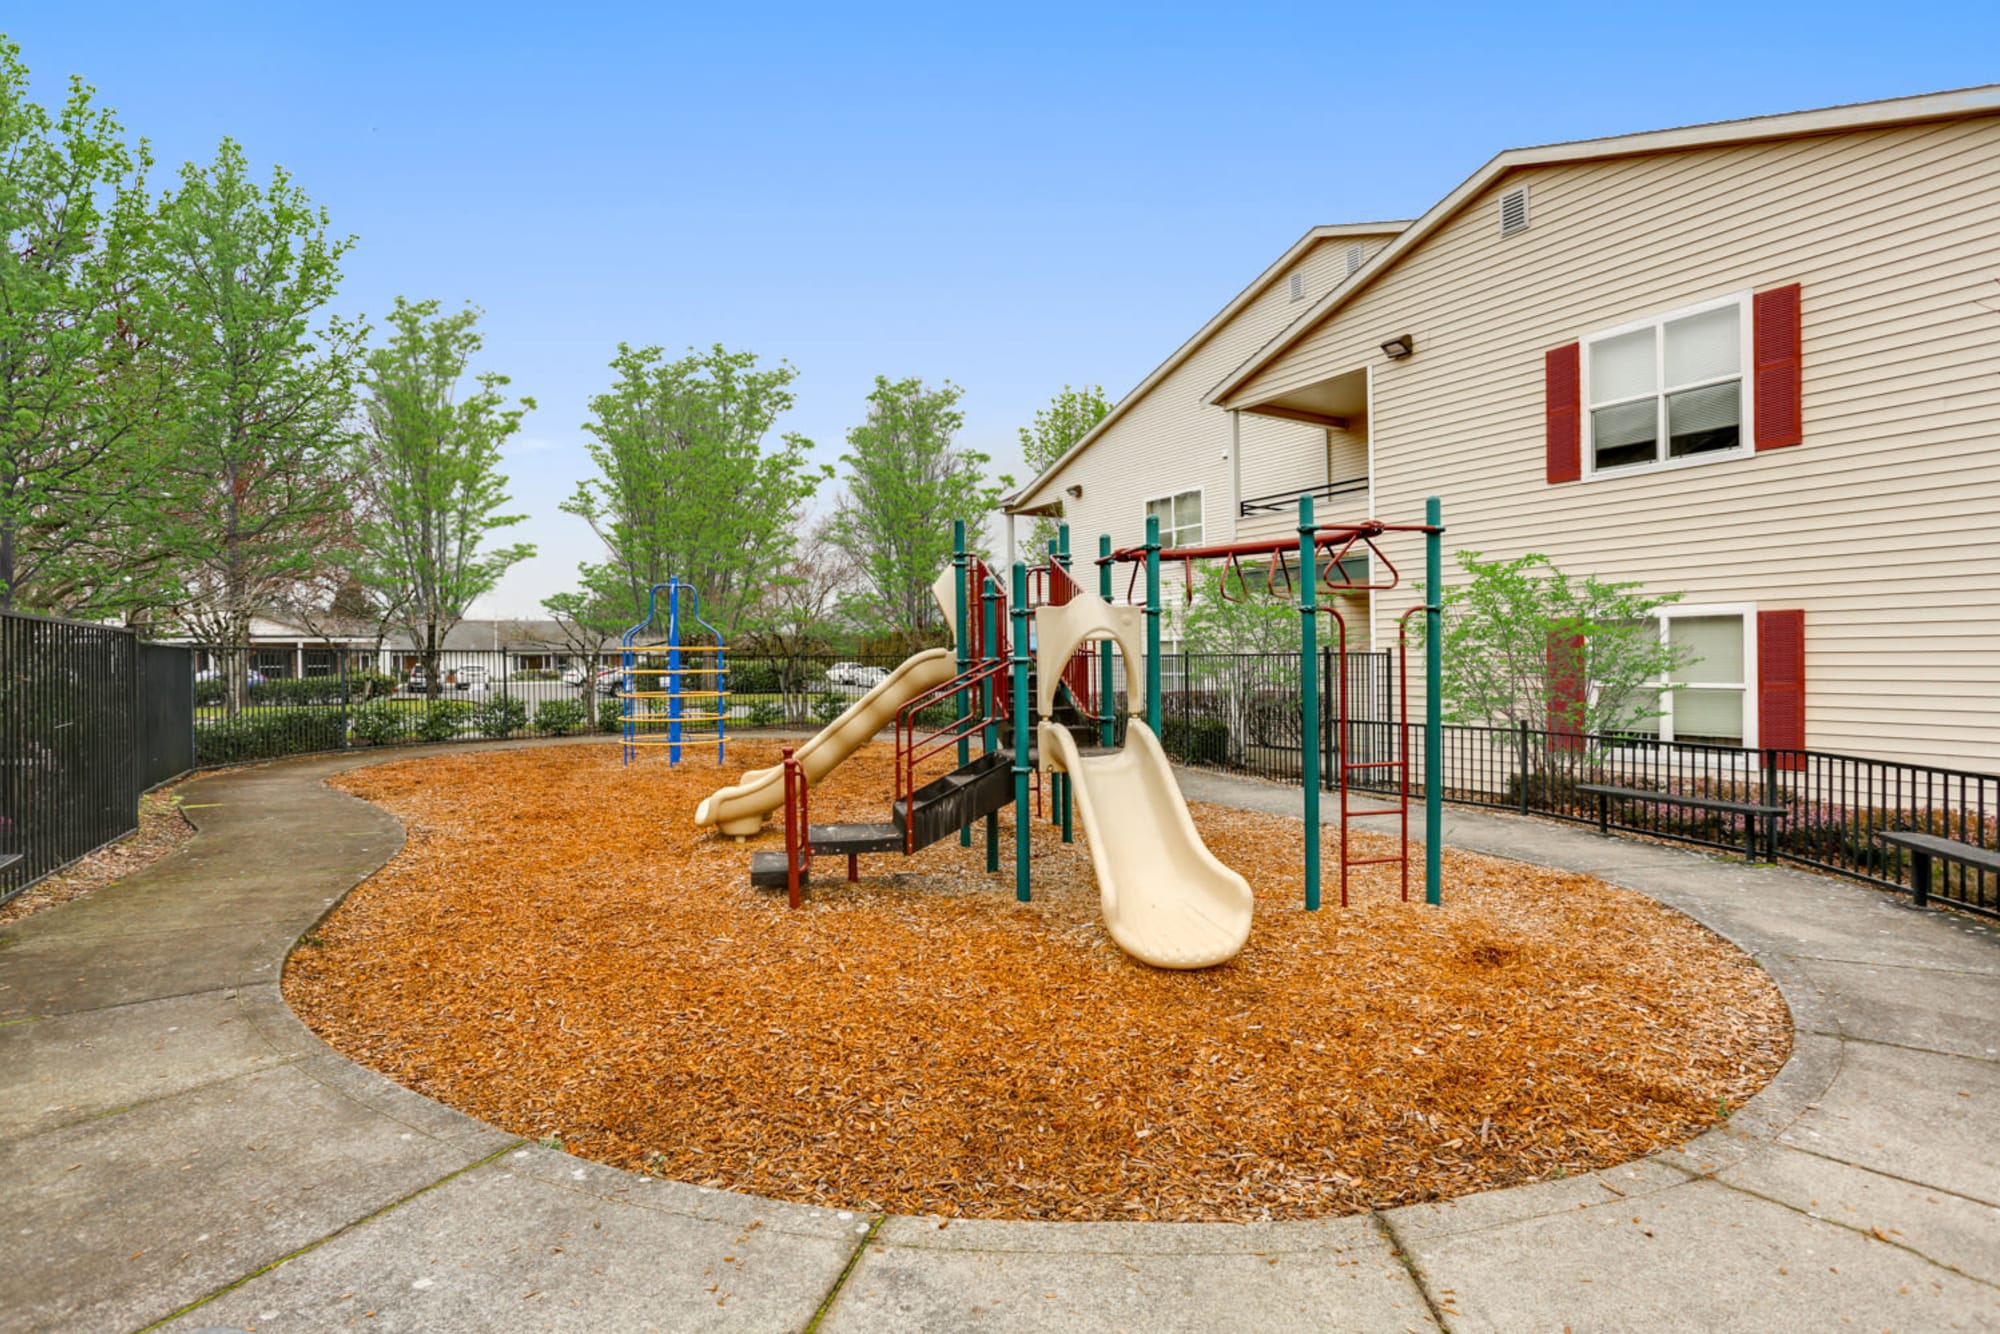 Playground at The Landings at Morrison Apartments in Gresham, Oregon